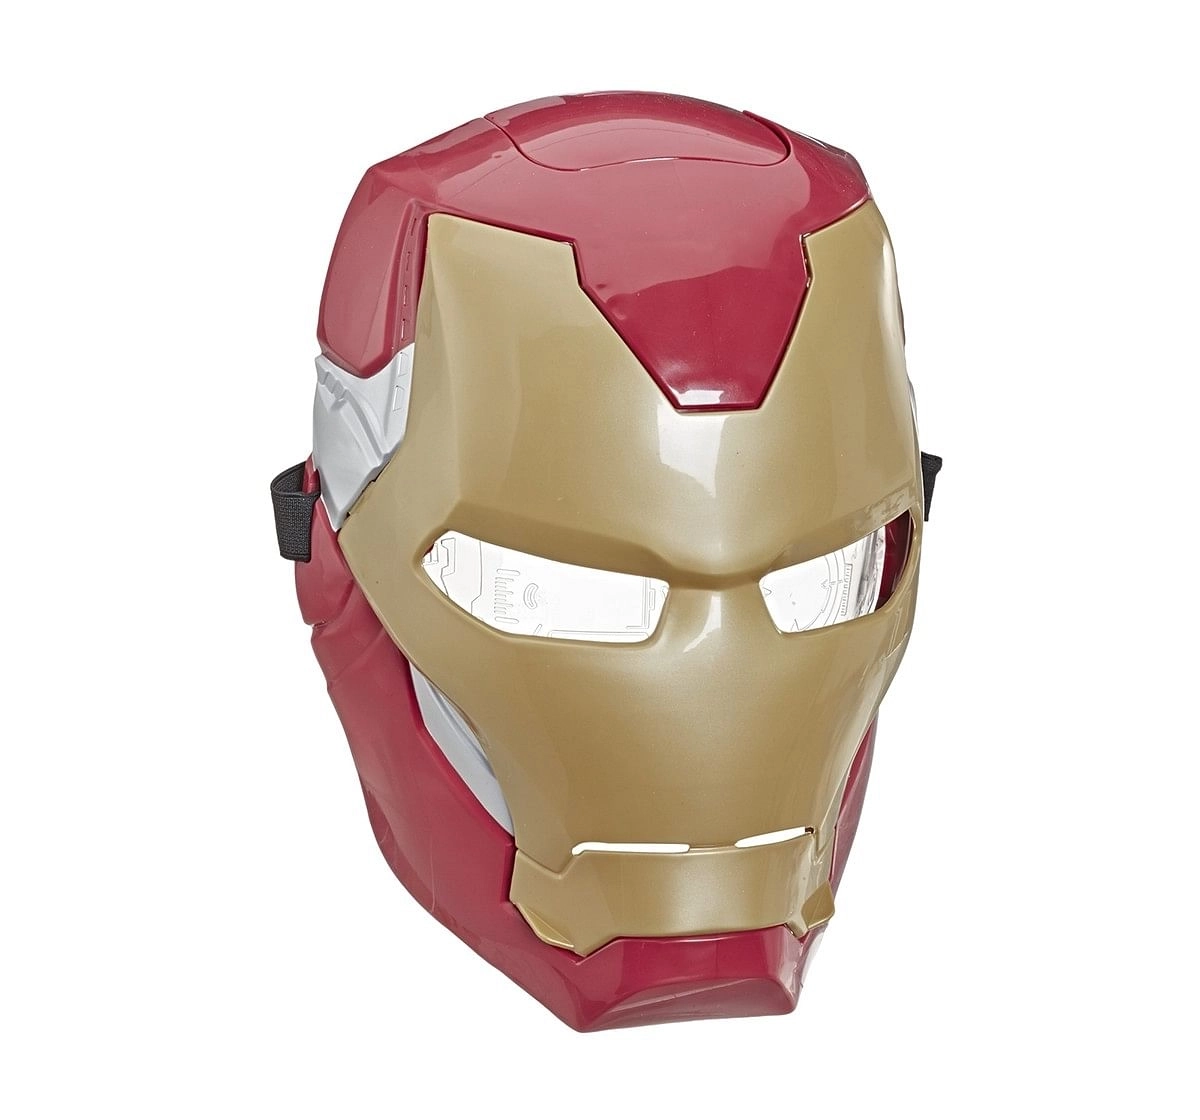 Marvel Avengers Iron Man Flip Fx Mask Action Figure Play Sets for Kids age 5Y+ 